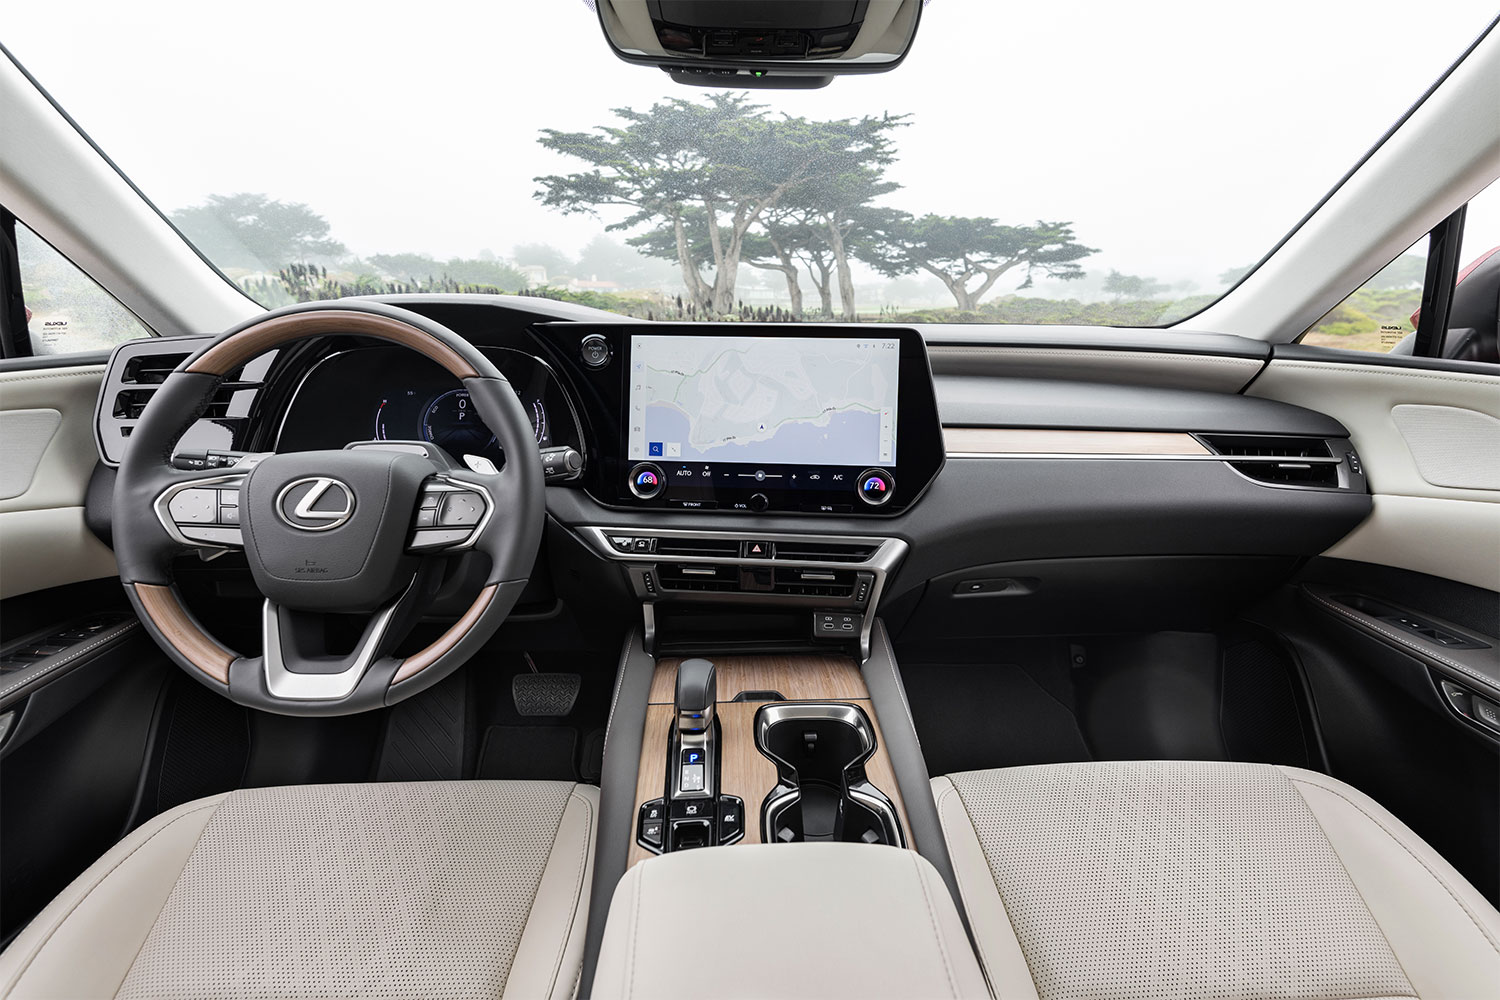 The dashboard and infotainment system on the 2023 Lexus RX 350h hybrid SUV